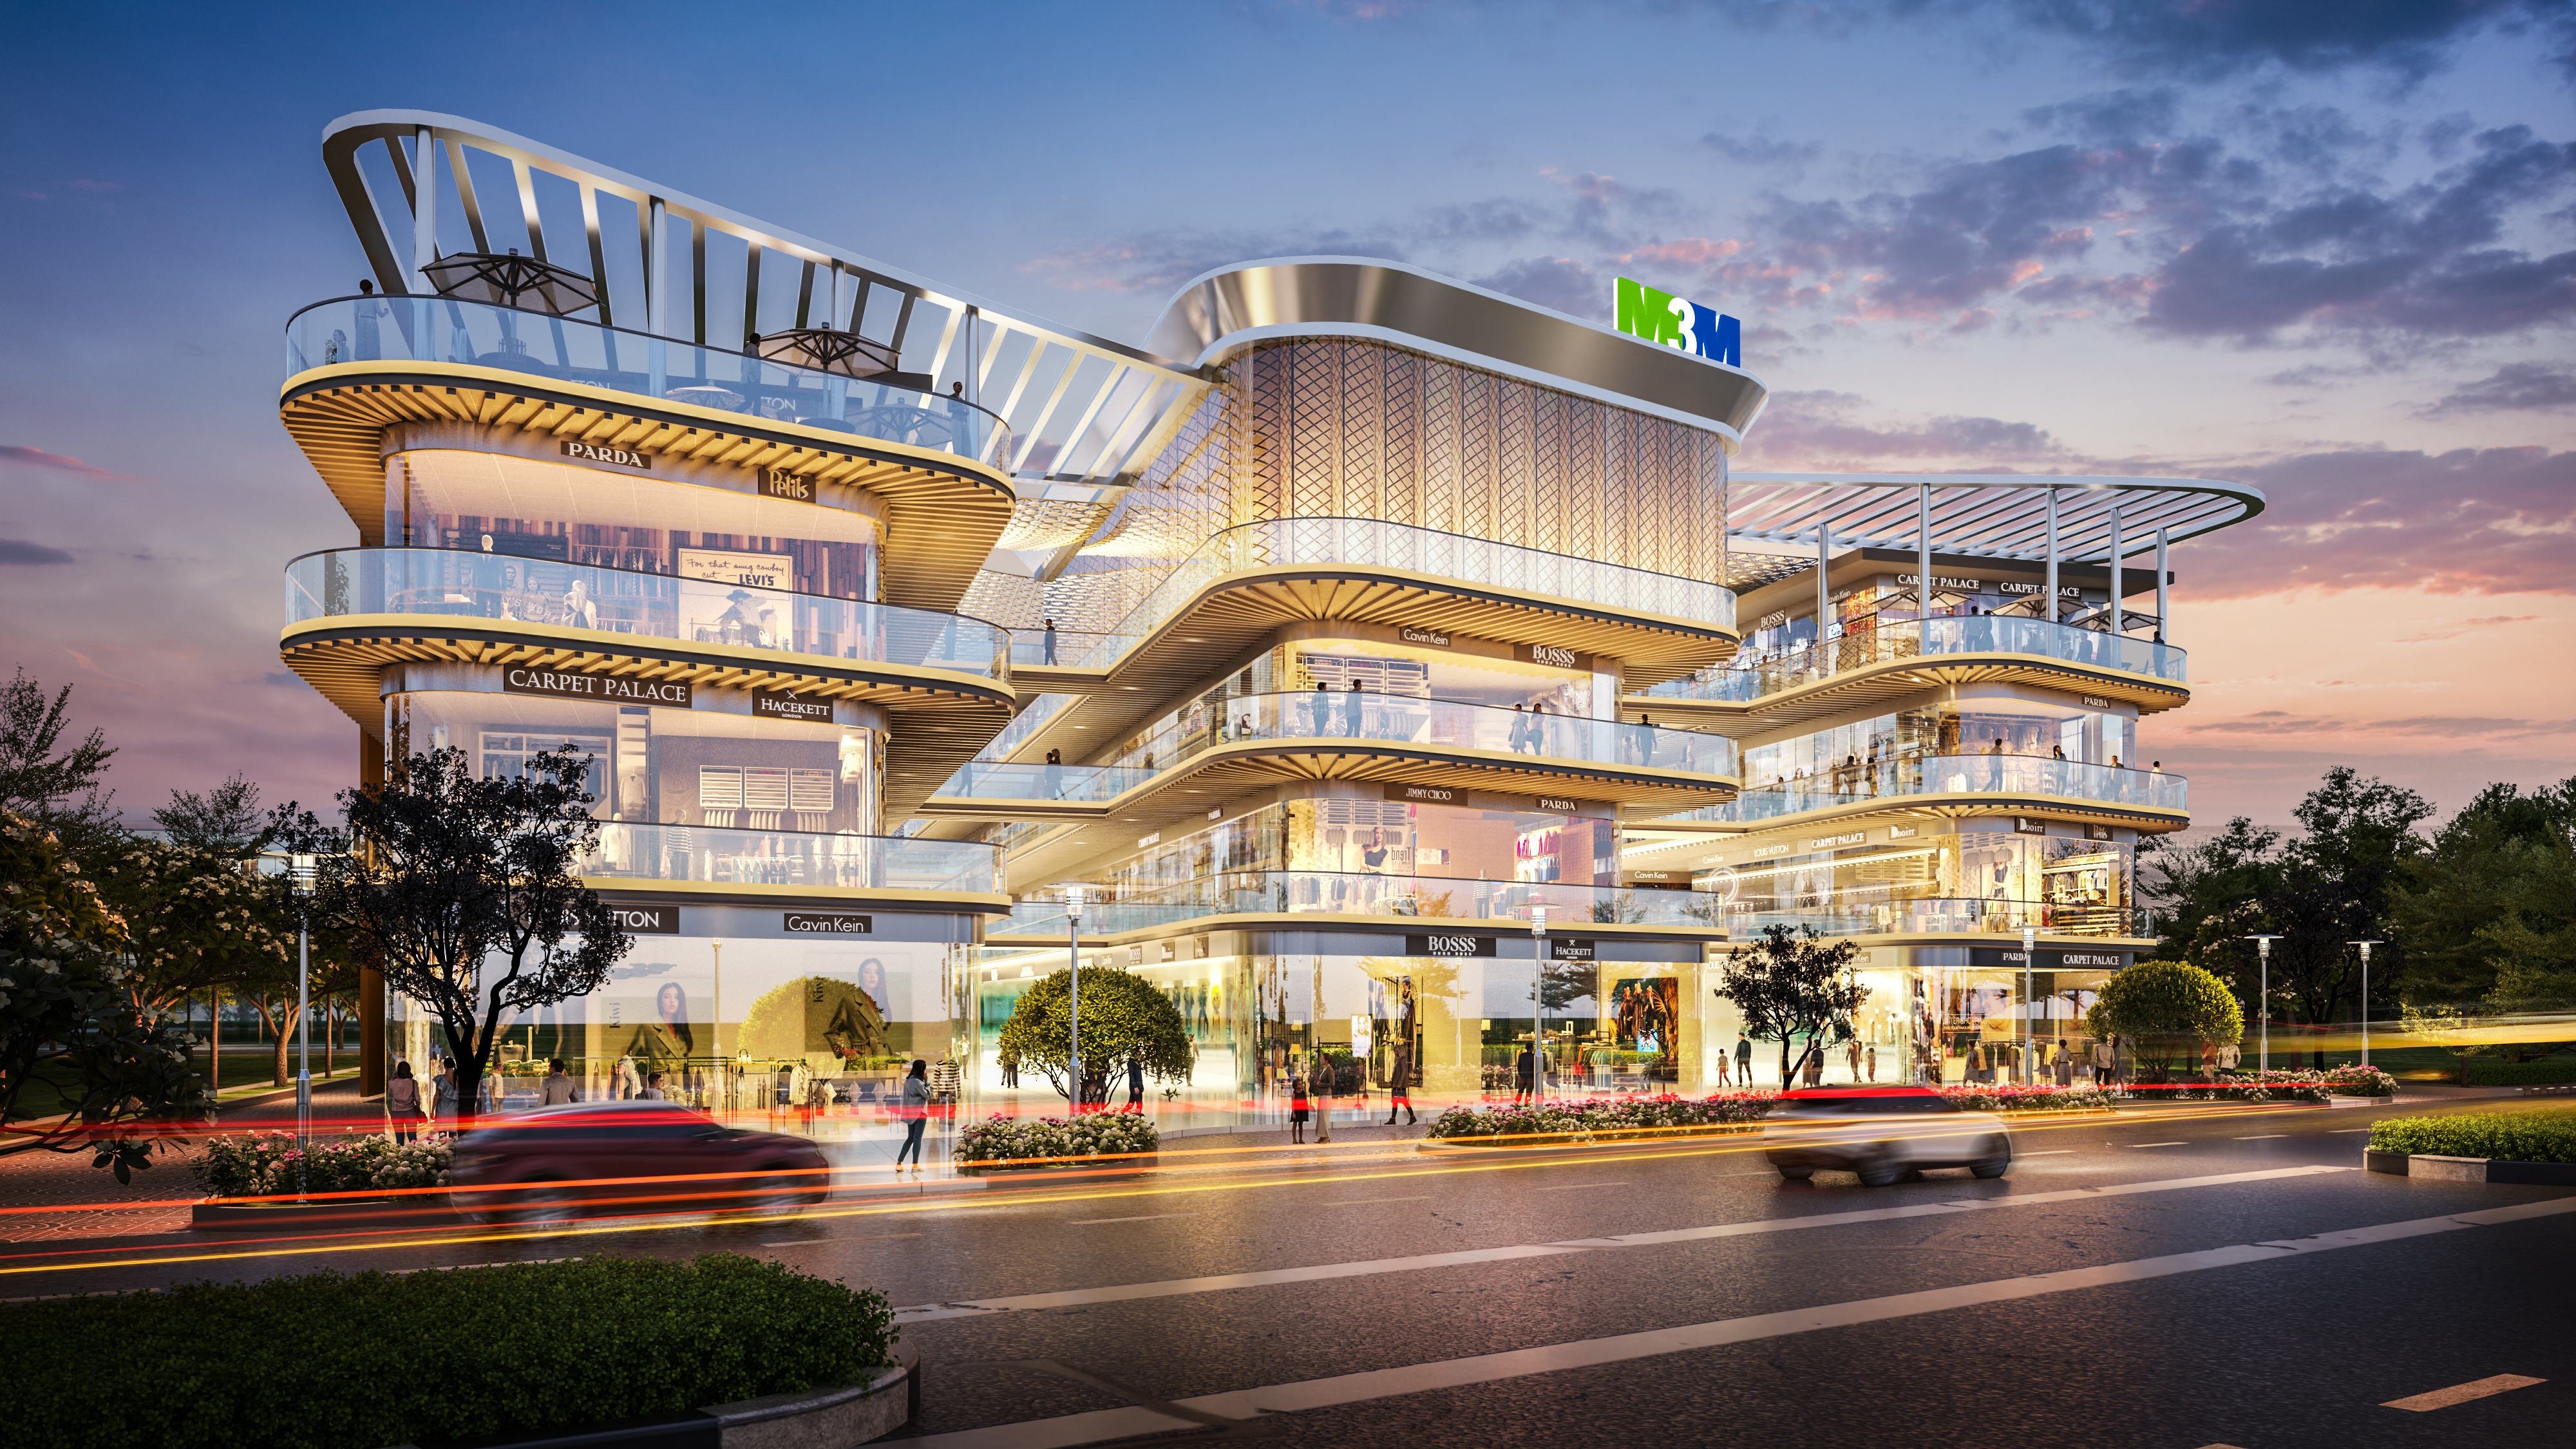 M3M Launches 4.87 Lakh Sq Ft Retail Project in Gurugram